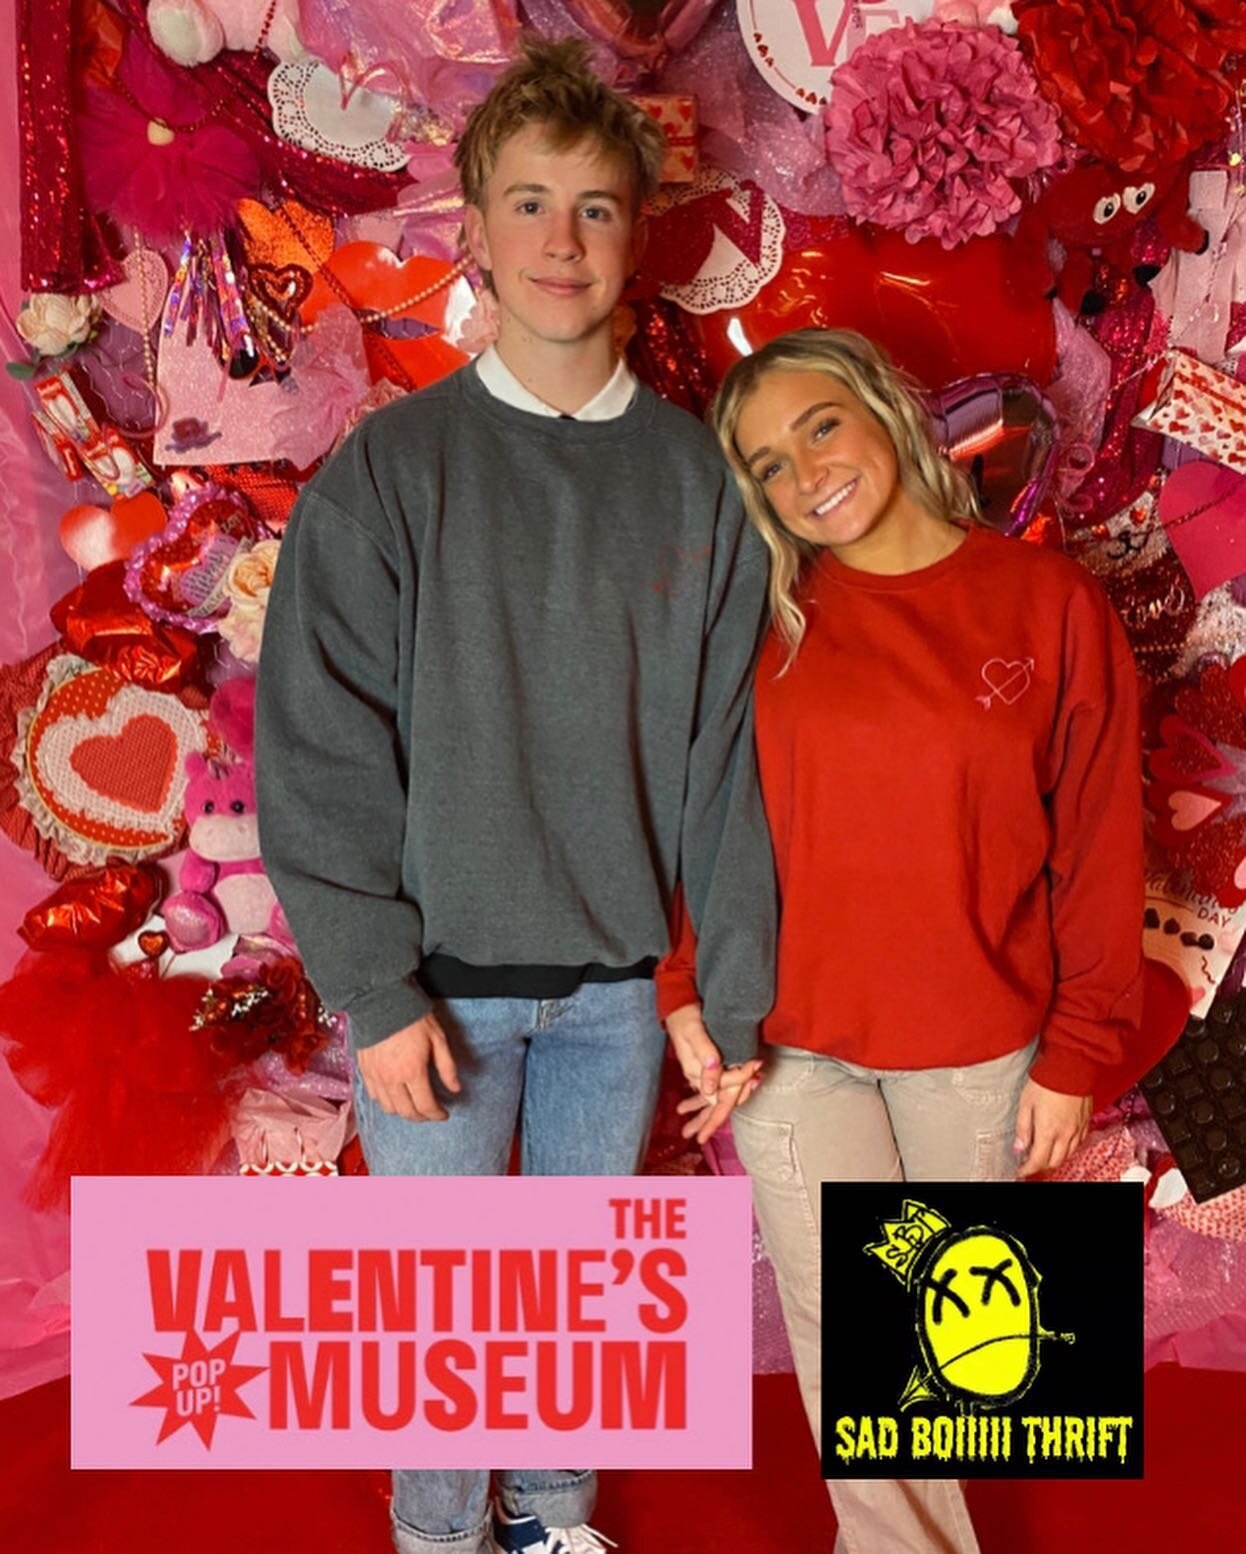 💕GIVEAWAY💕
&hellip;
We are giving away two of our limited edition Valentine&rsquo;s Museum pullovers! Shout out to @sadboiiiiithrift for making these amazing sweaters!❤️ 

To Enter: 
- Follow @sadboiiiiithrift &amp; @thevalentinesmuseum 
- Tag your